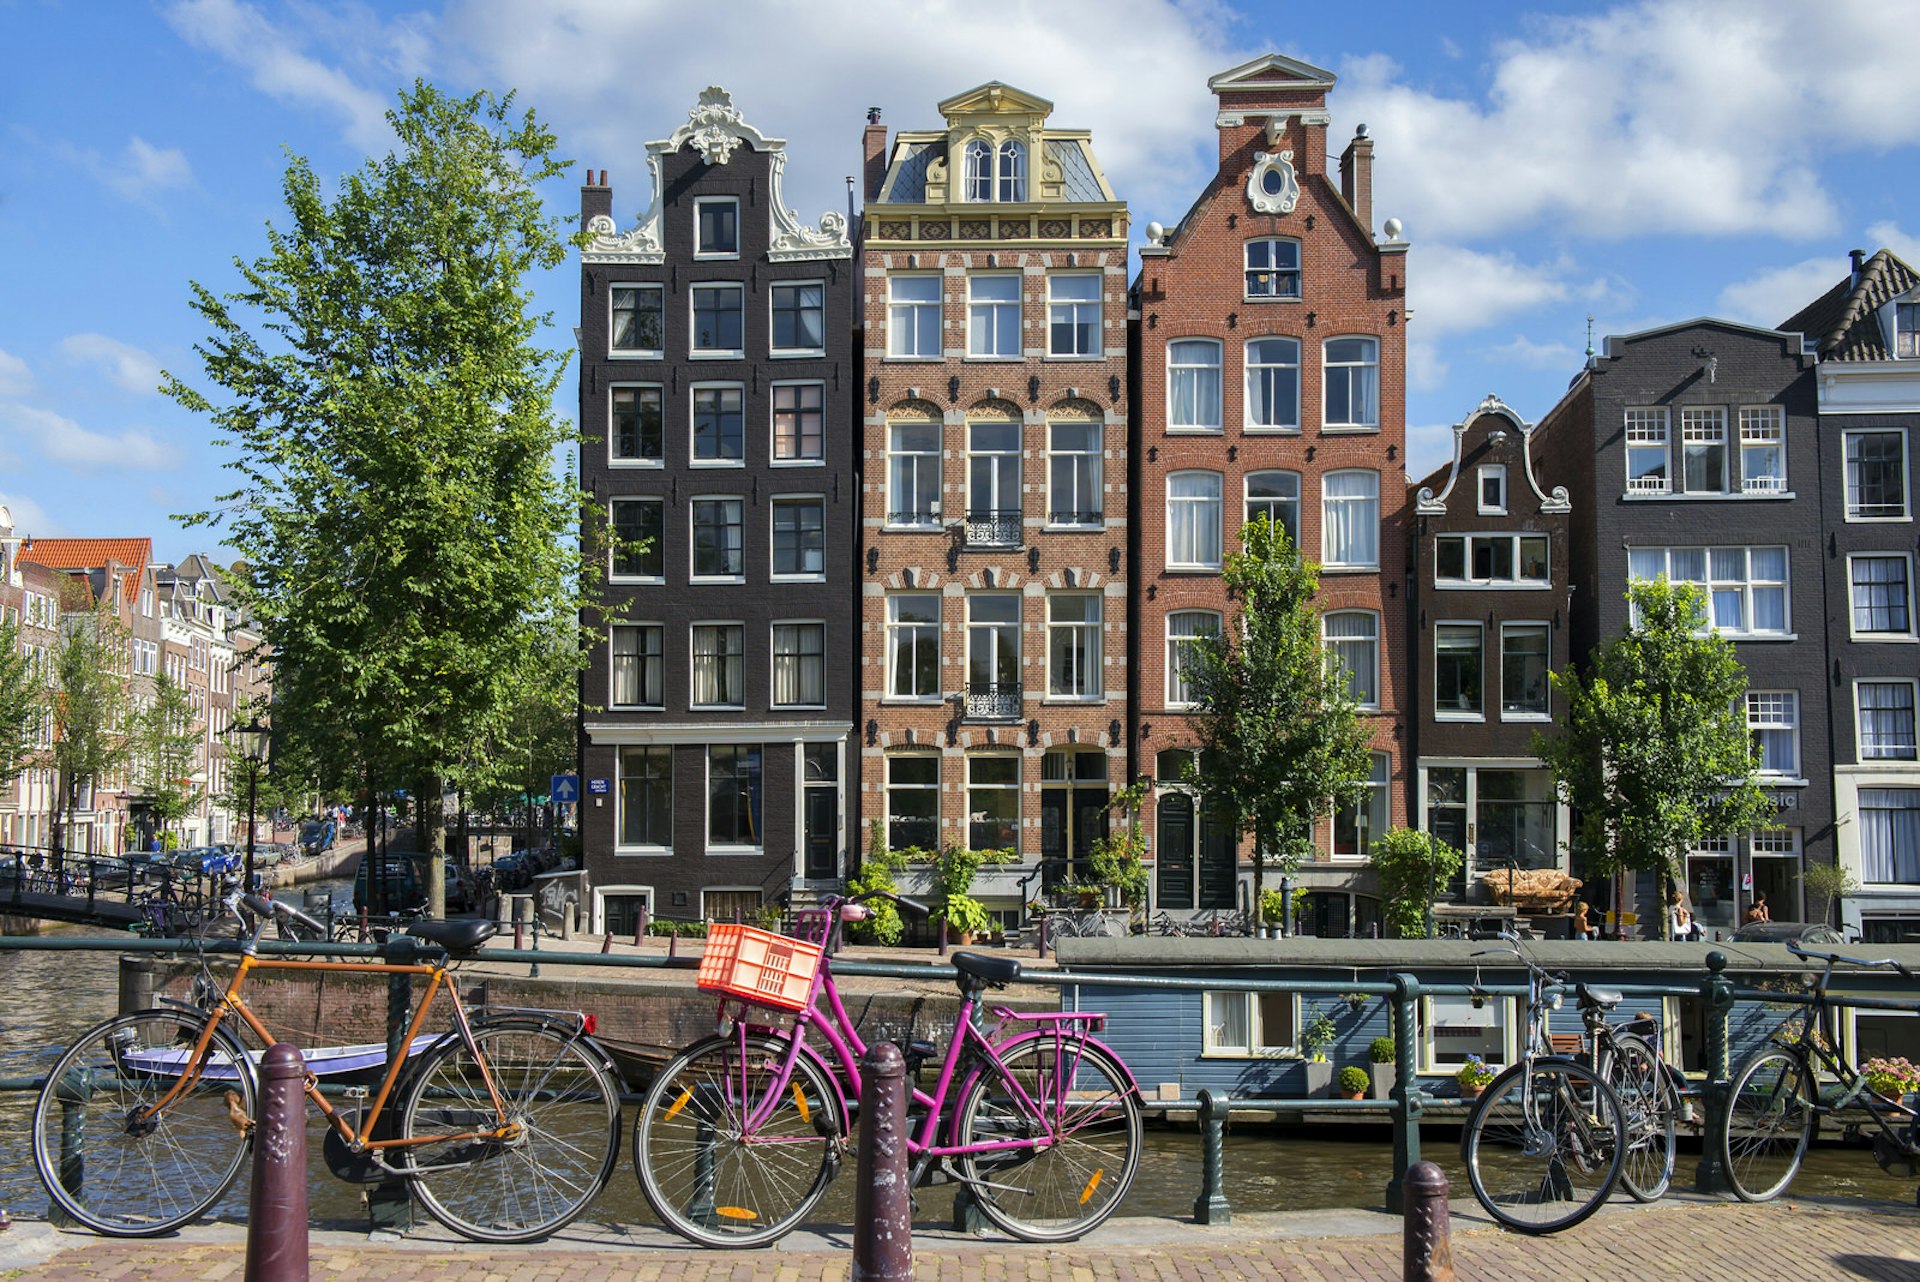 Traditional buildings in Amsterdam